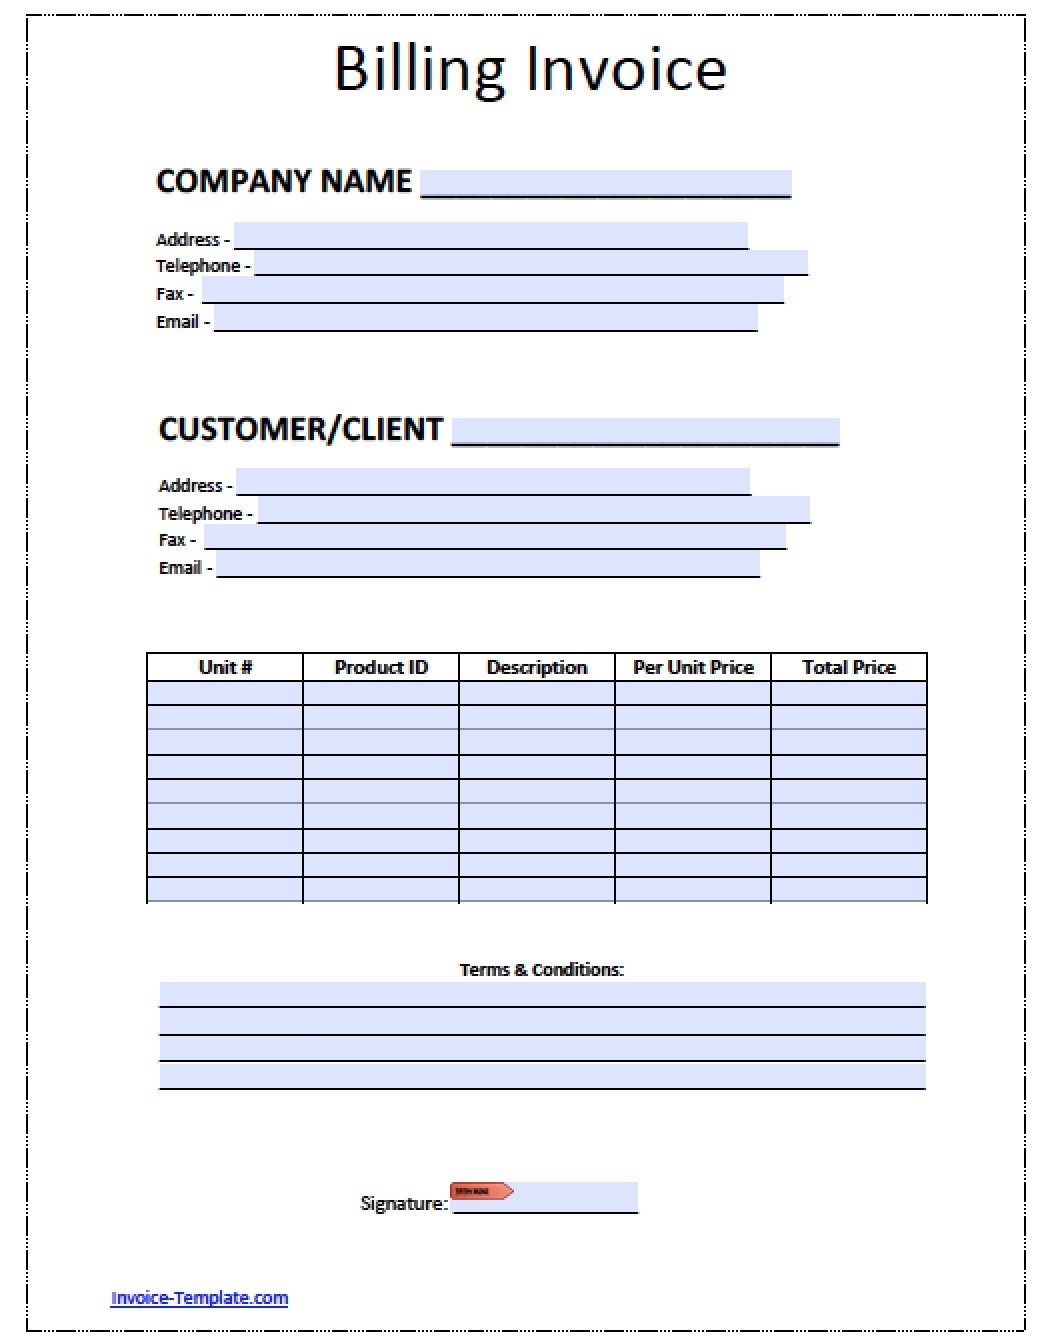 free blank invoice templates in pdf word amp excel invoice spreadsheet template